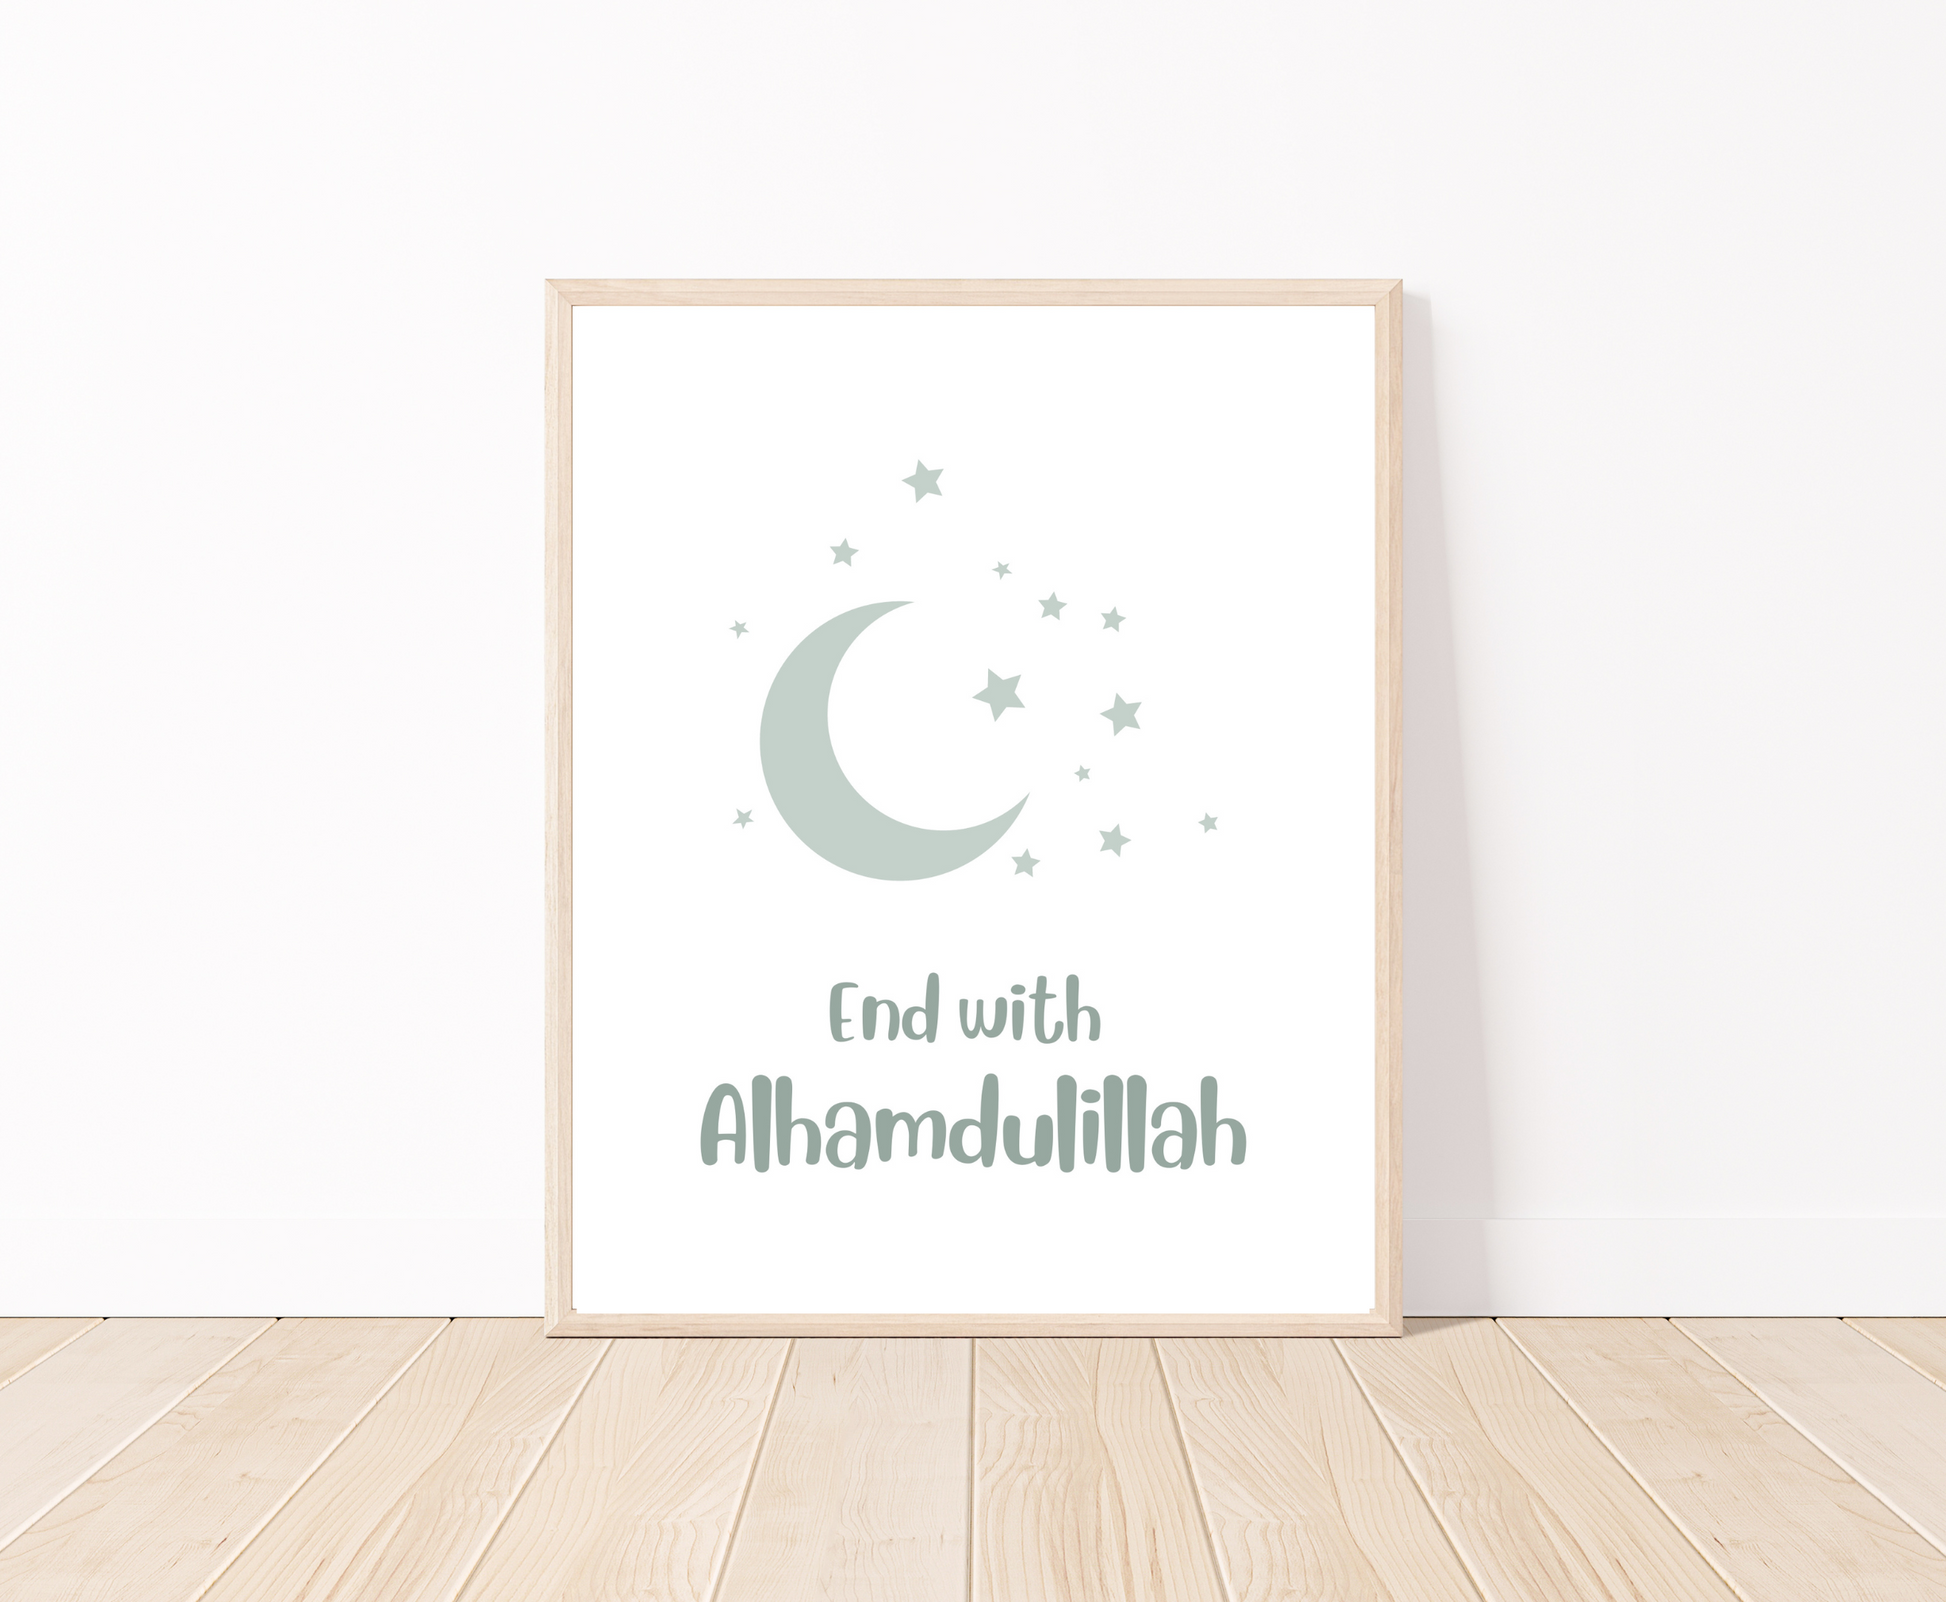 A digital poster that is placed on a white wall and parquet flooring shows a baby green crescent and tiny stars with the word “End with Alhamdulillah” written just below.